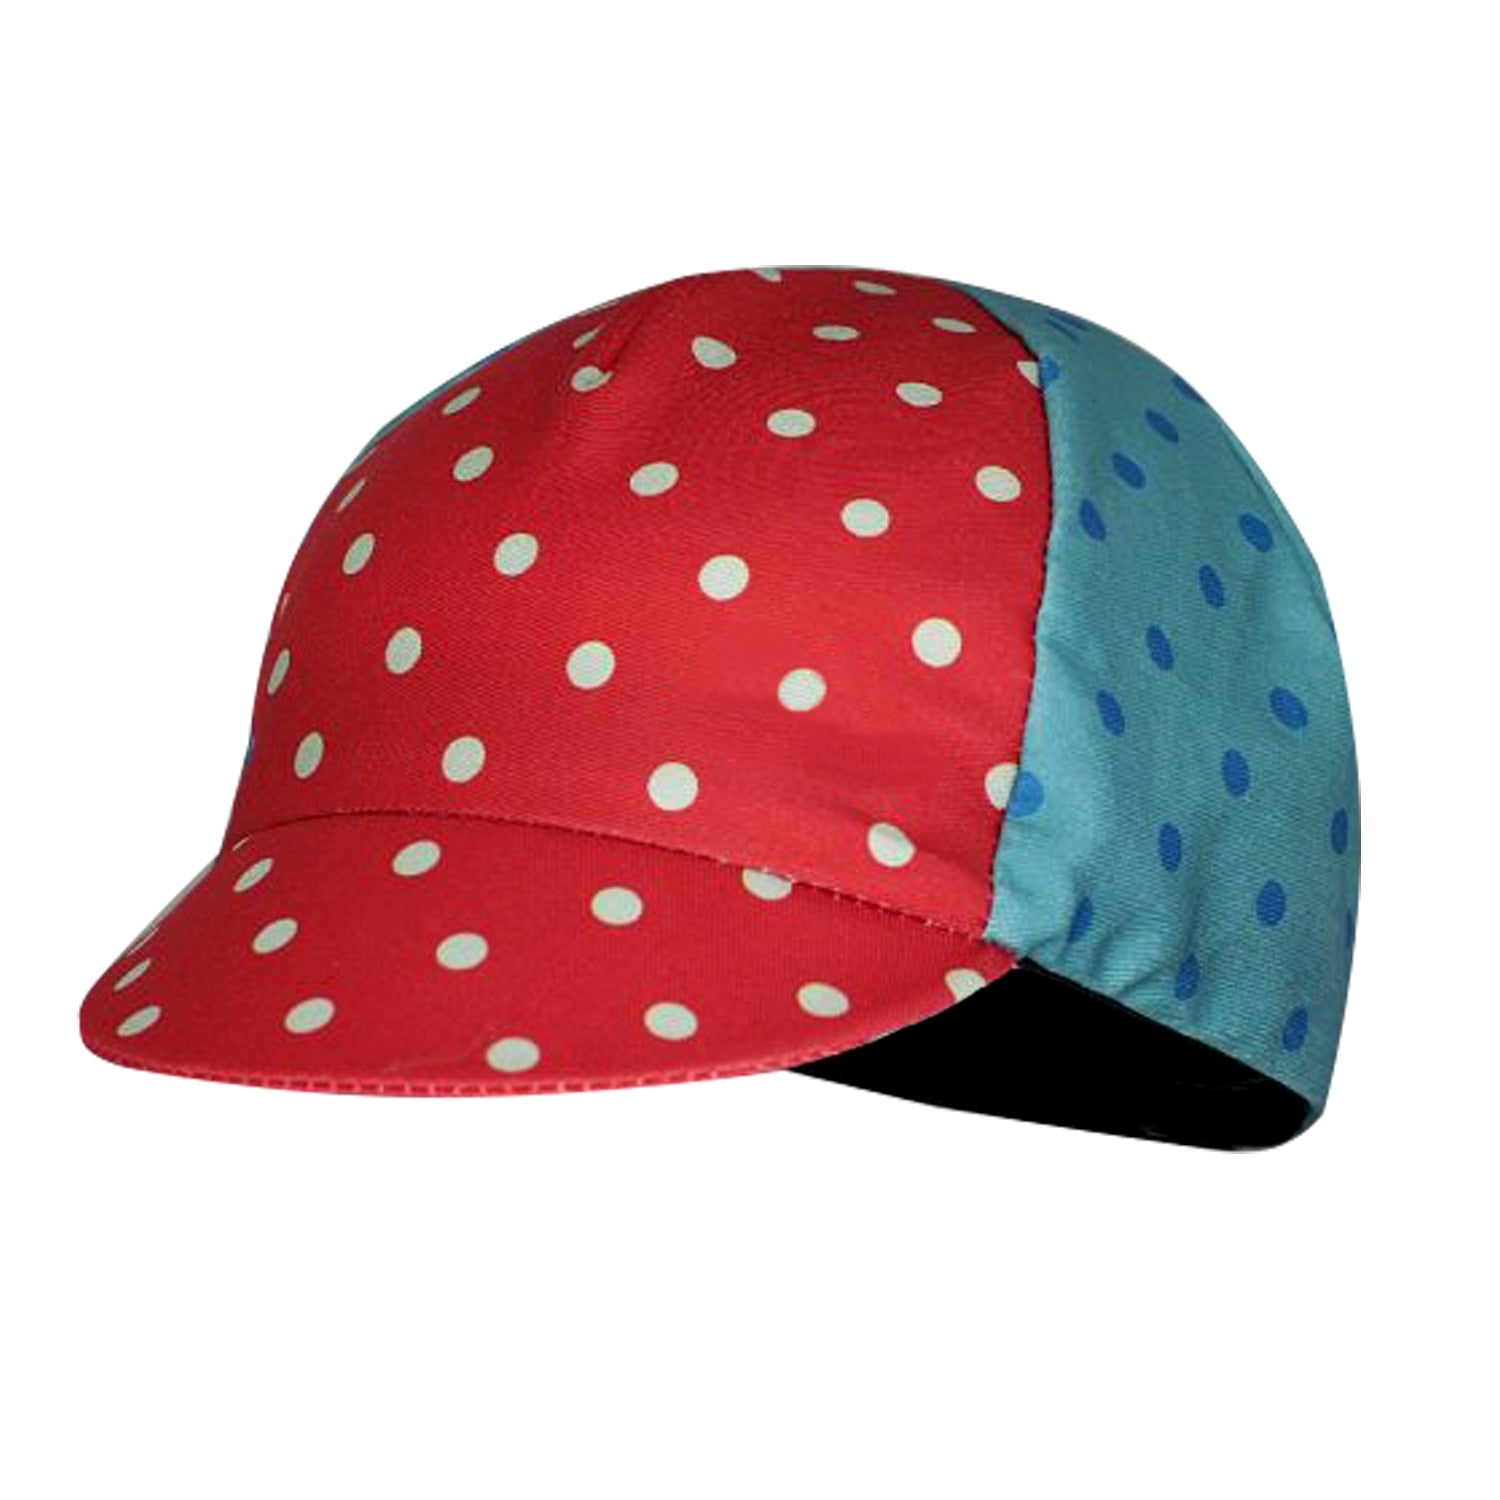 Classic Combination Of Red And Blue White Dot Polyester Cycling Caps Moisture Wicking Quick Dry Sports Balaclava Unisex Bike Hat